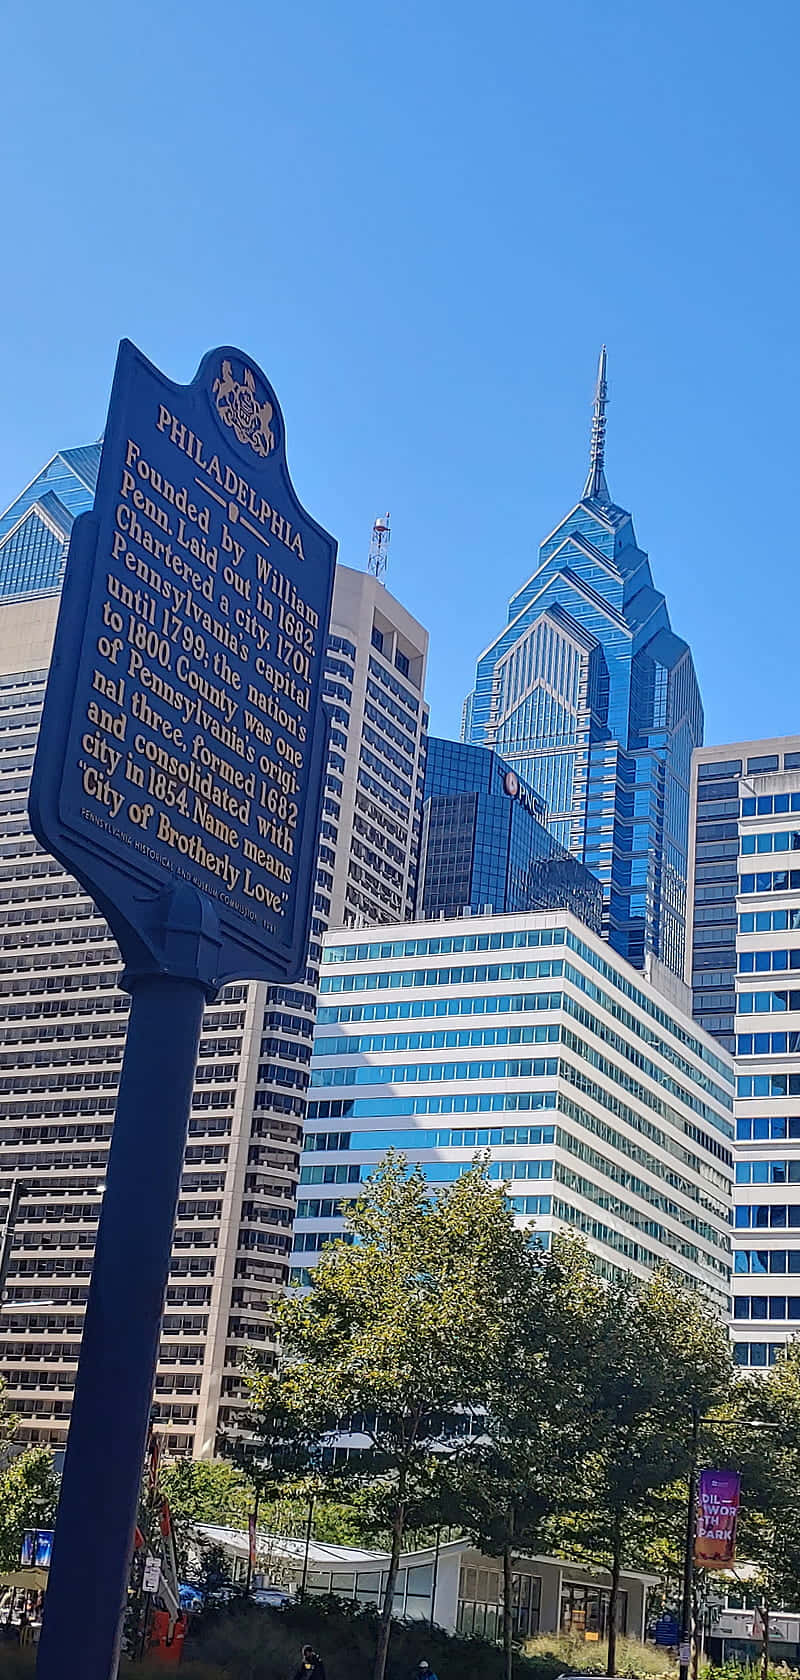 Enjoying a bright and beautiful day in downtown Philadelphia. Wallpaper